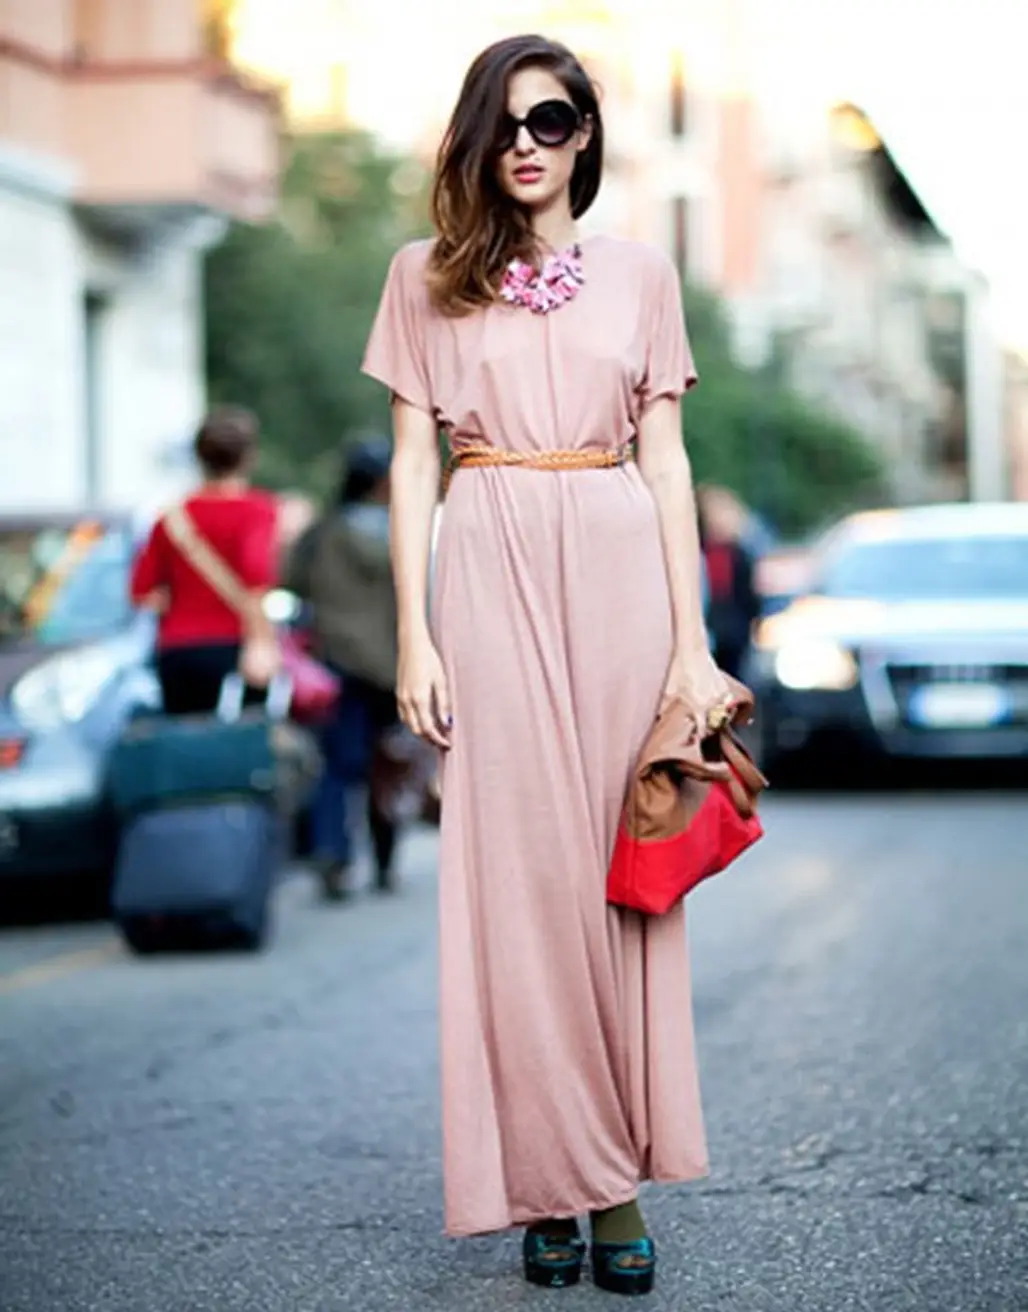 Try a Lighter Pink